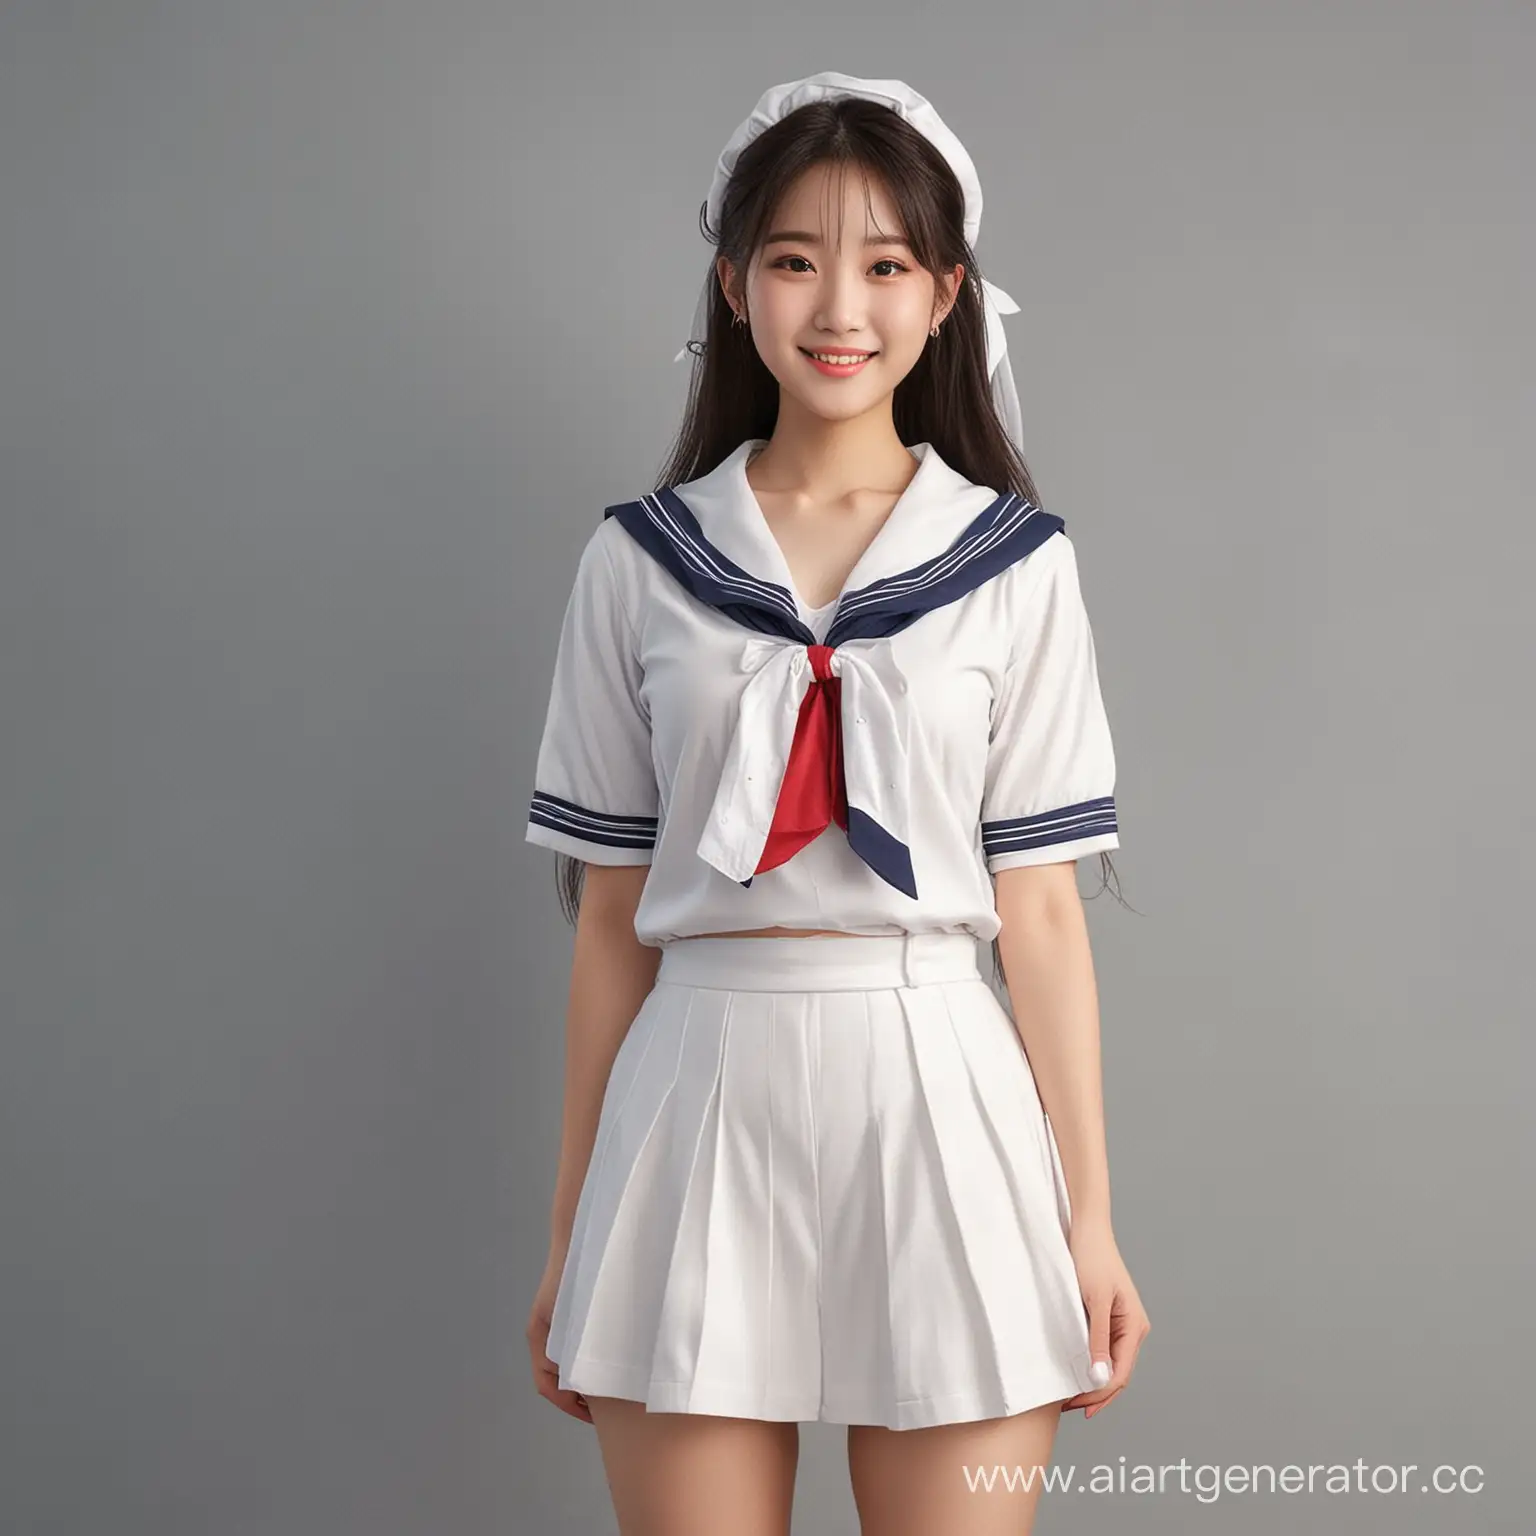 Sweet-East-Asian-Girl-in-Sailor-Suit-and-JKStyle-Dress-Smiling-Cutely